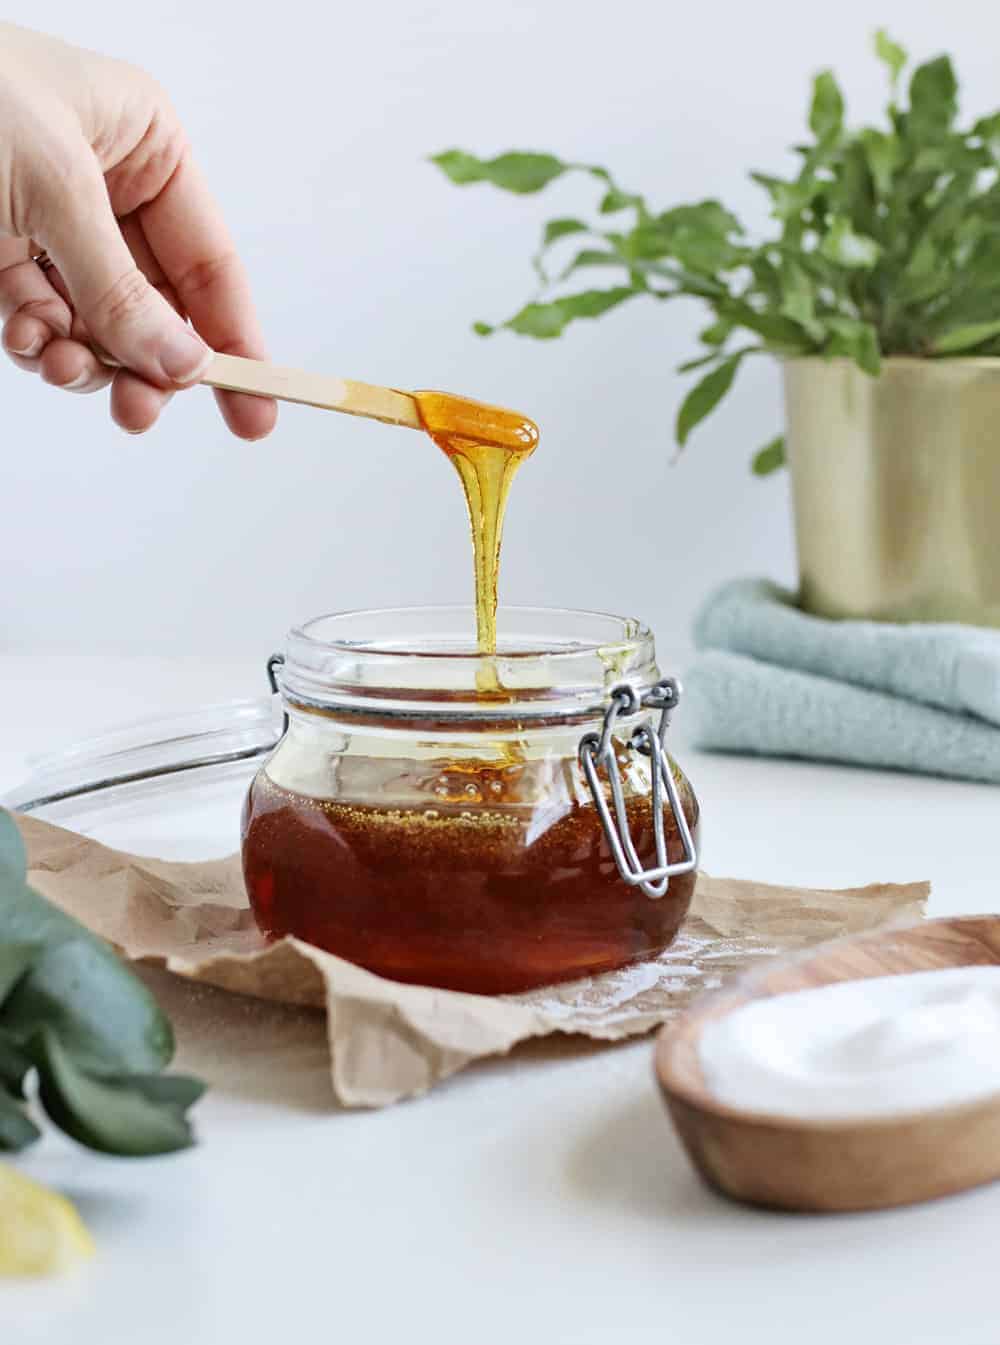 Everything You Need To Know About Homemade Sugar Wax - Hello Glow